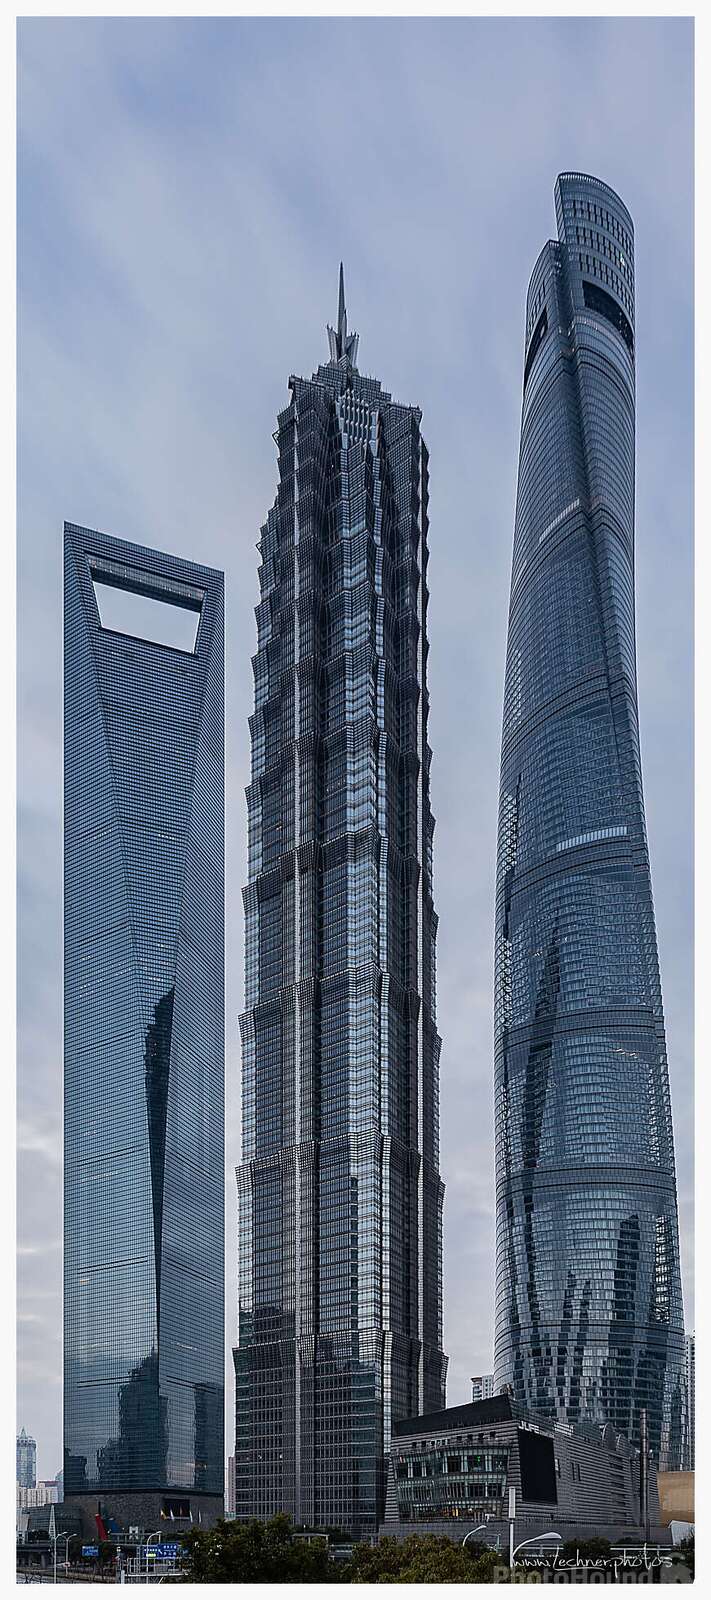 Image of View of Shanghai Tower  by Florian Lechner